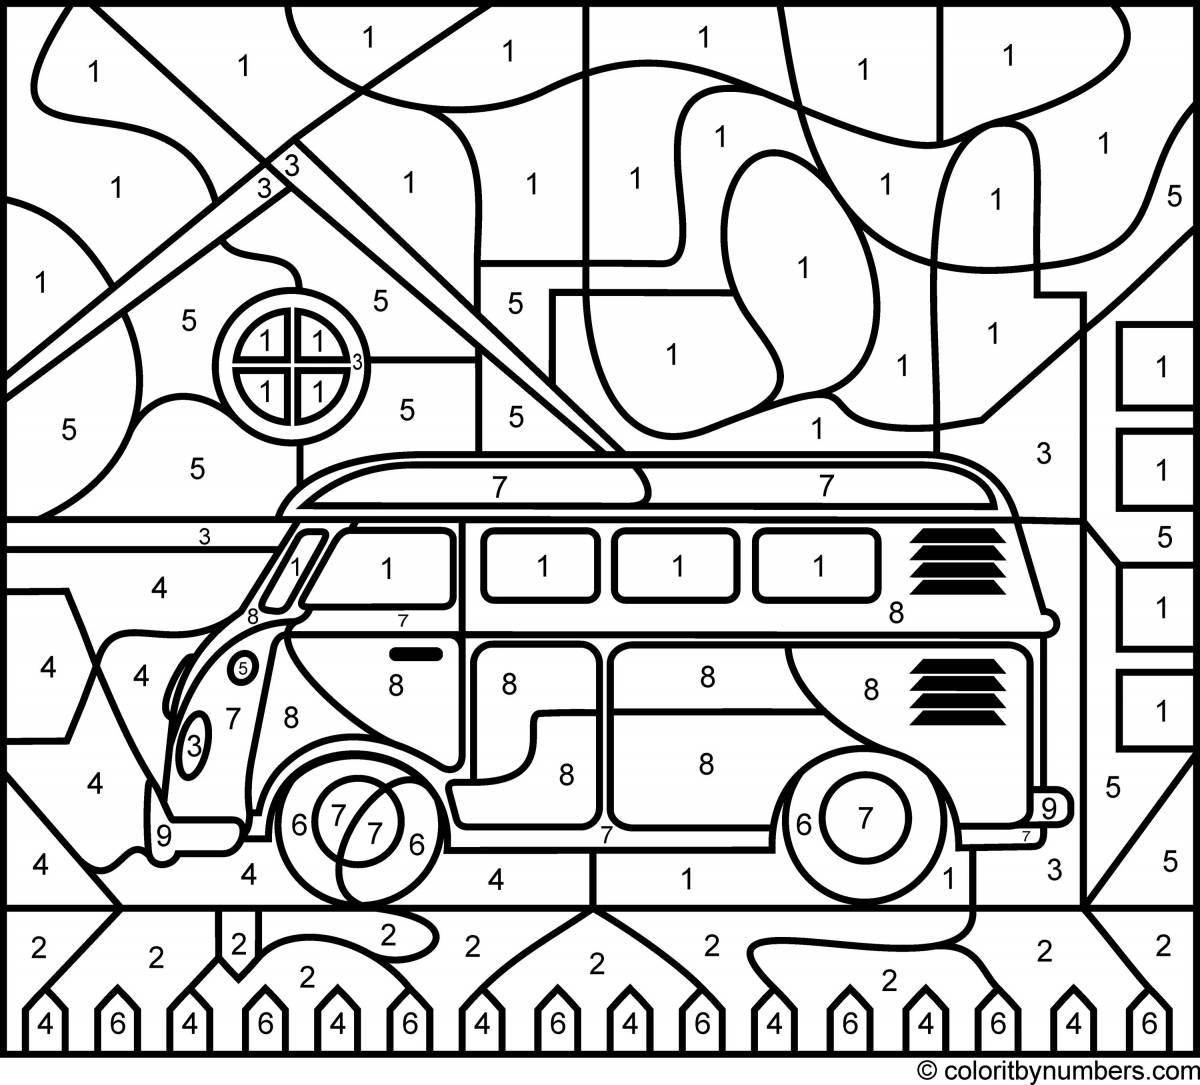 Color-frenzy coloring page digital for kids